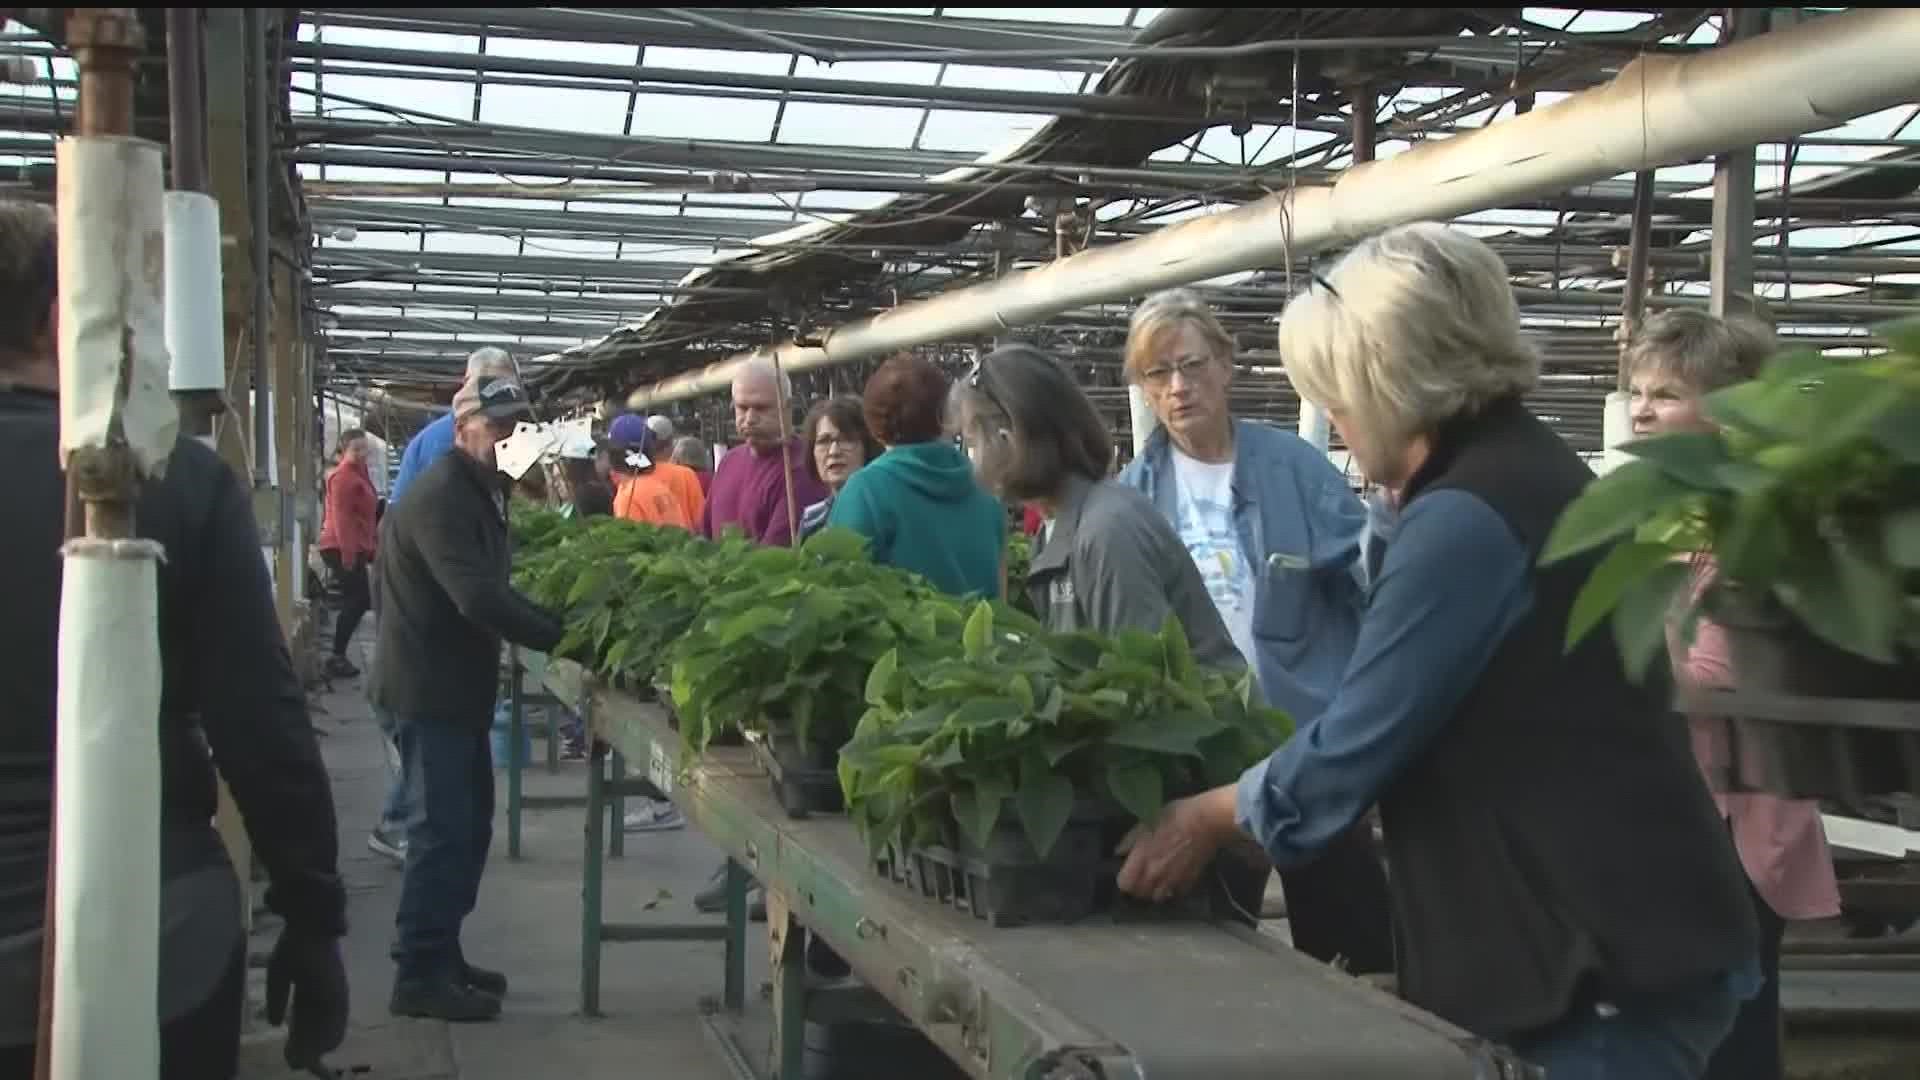 Over the weekend, a fire devastated Lynde's Greenhouse but dozens of volunteers came out Tuesday morning to help the small business.